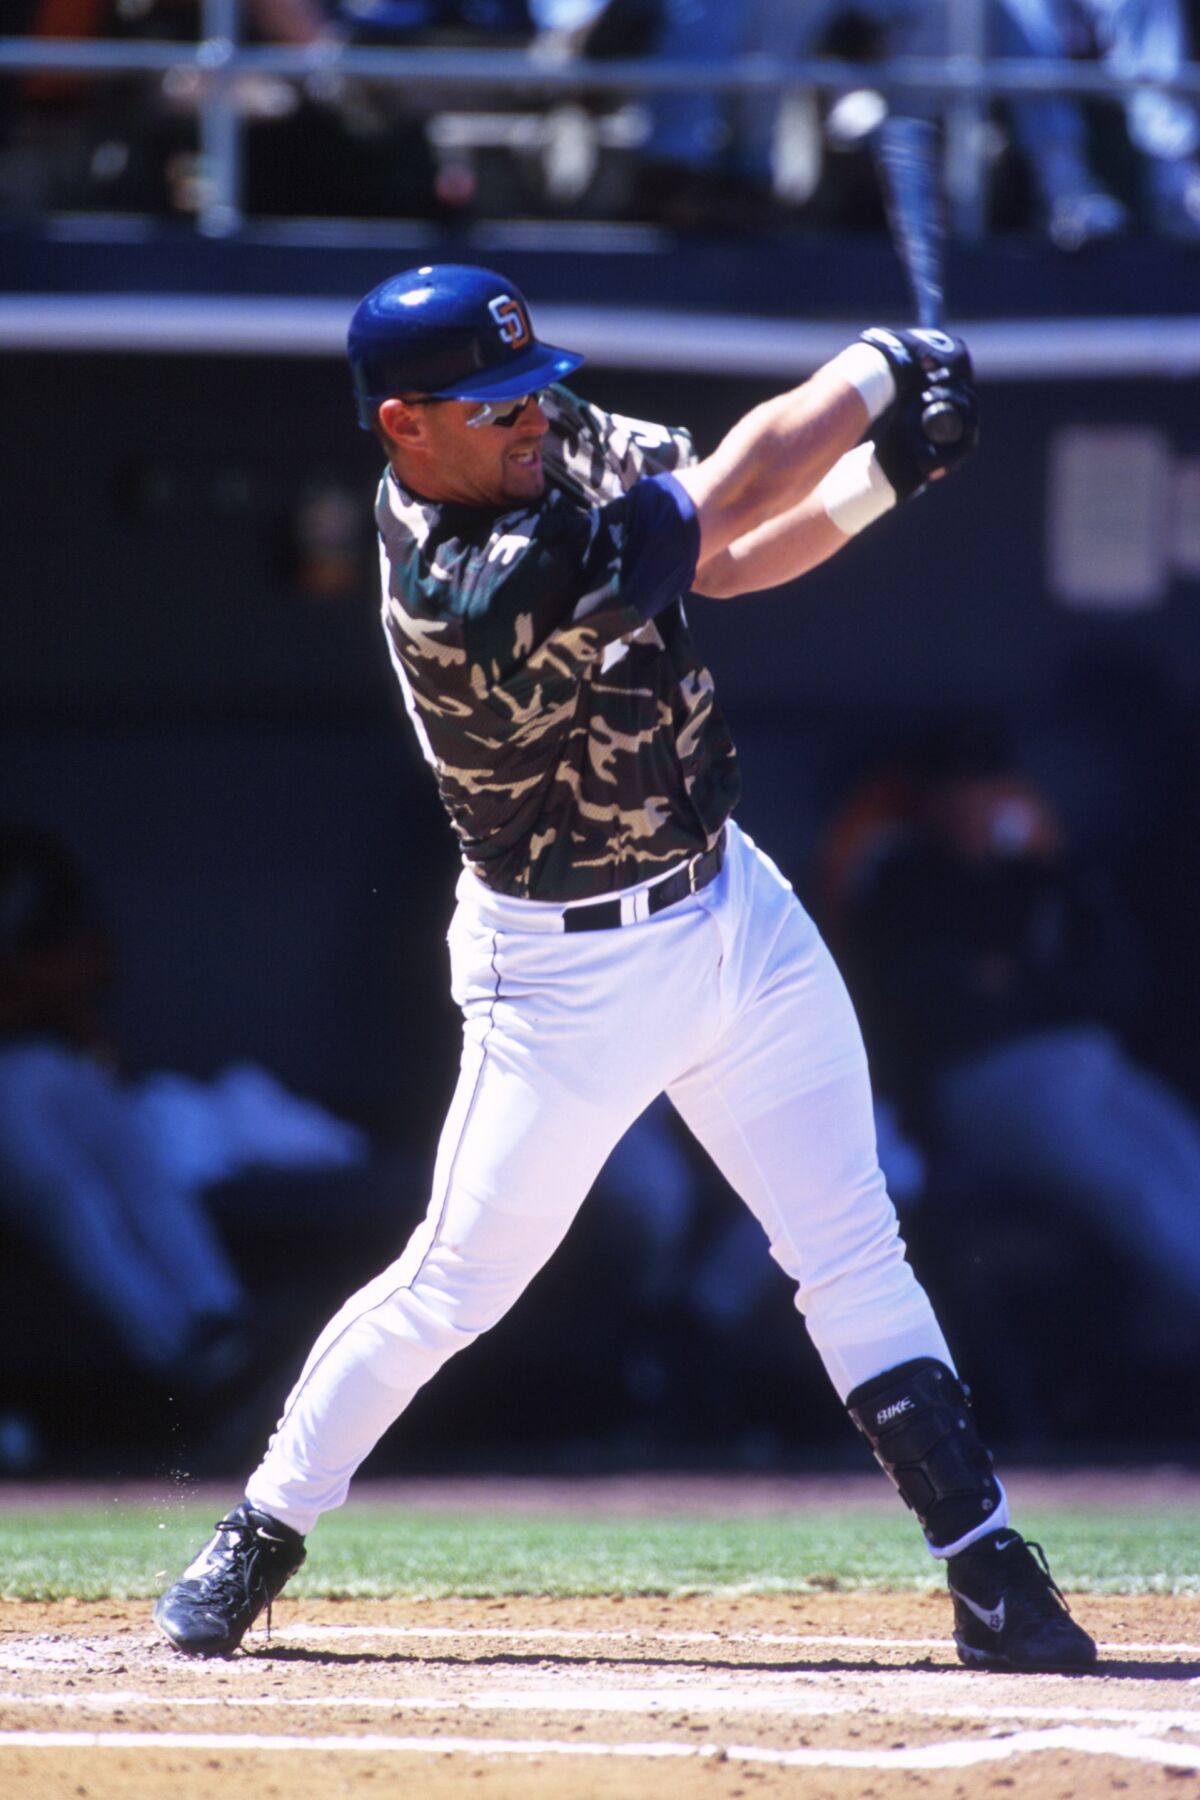 Padres third baseman Phil Nevin bats on April 13, 2000, at Qualcomm Stadium. This game marked the first time the Padres wore camouflage jerseys to honor the military.